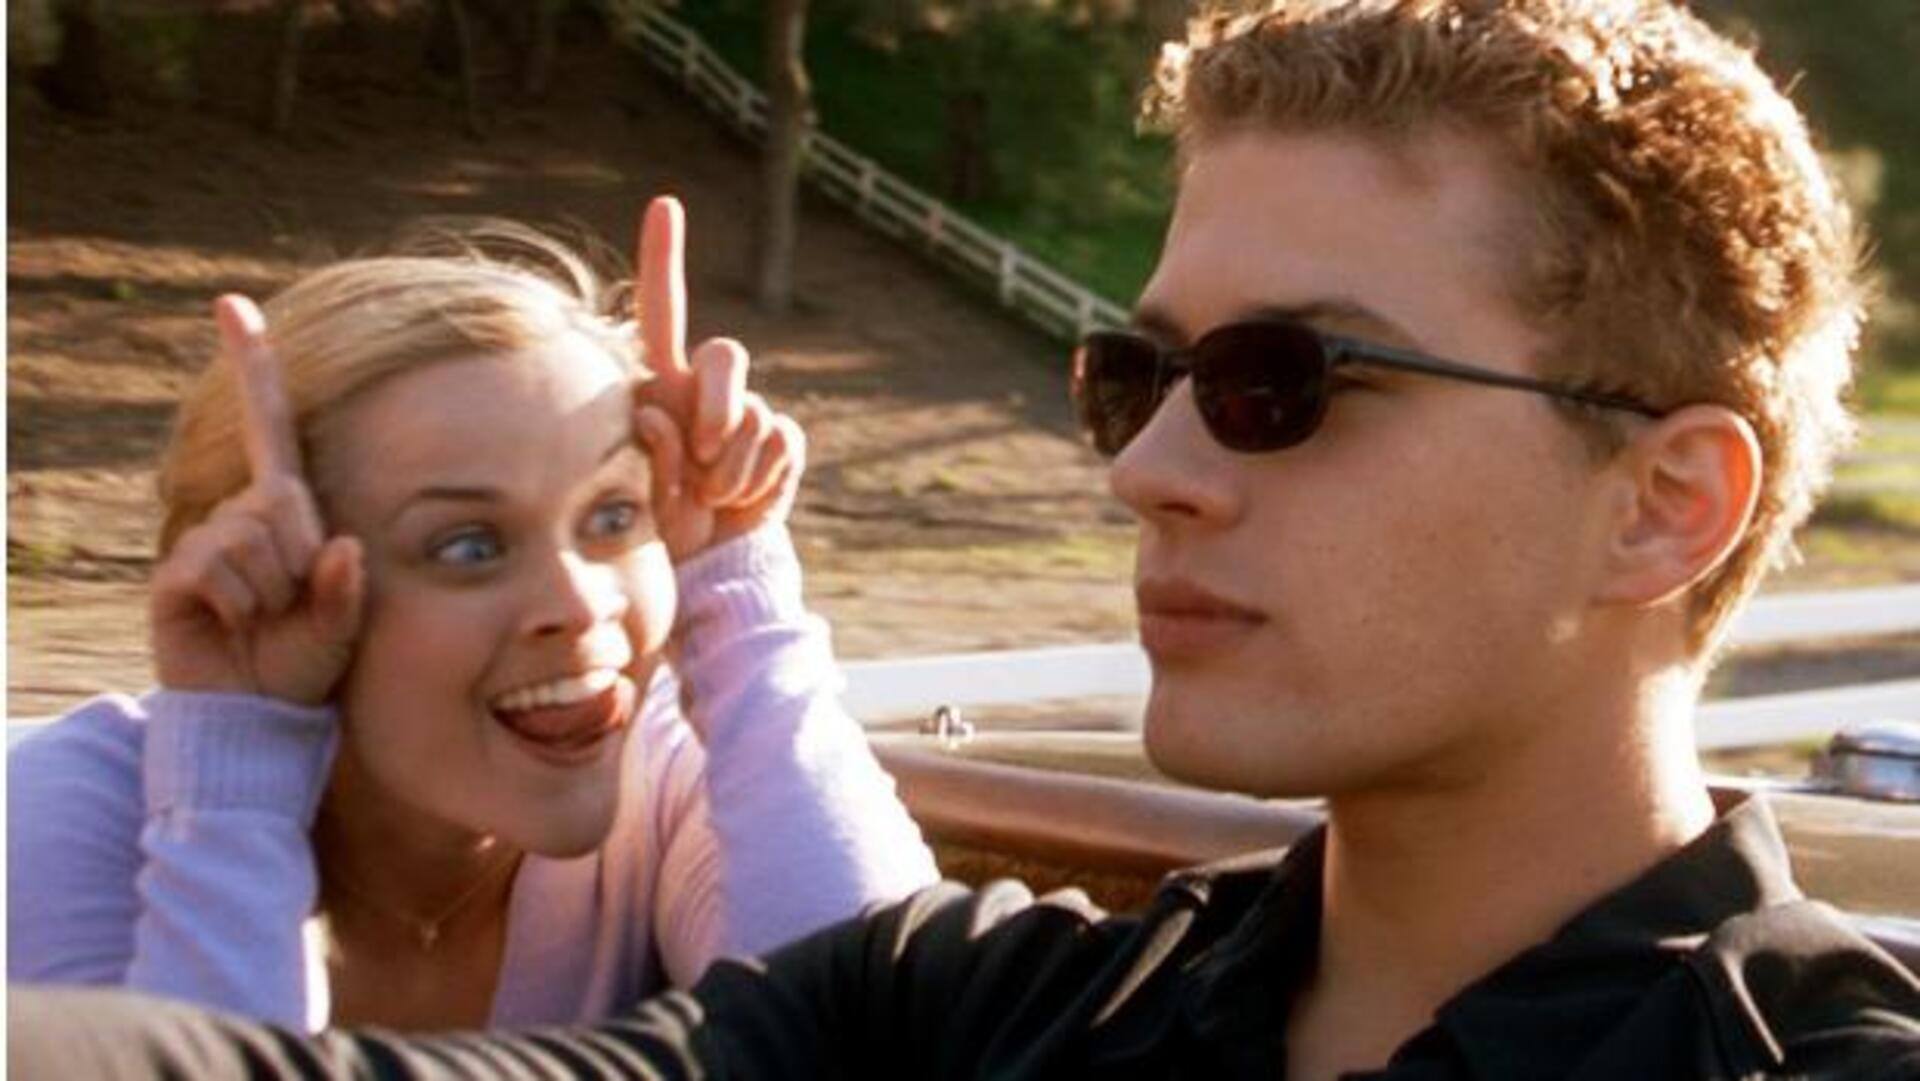 New 'Cruel Intentions' is coming: Cast, plot, release date